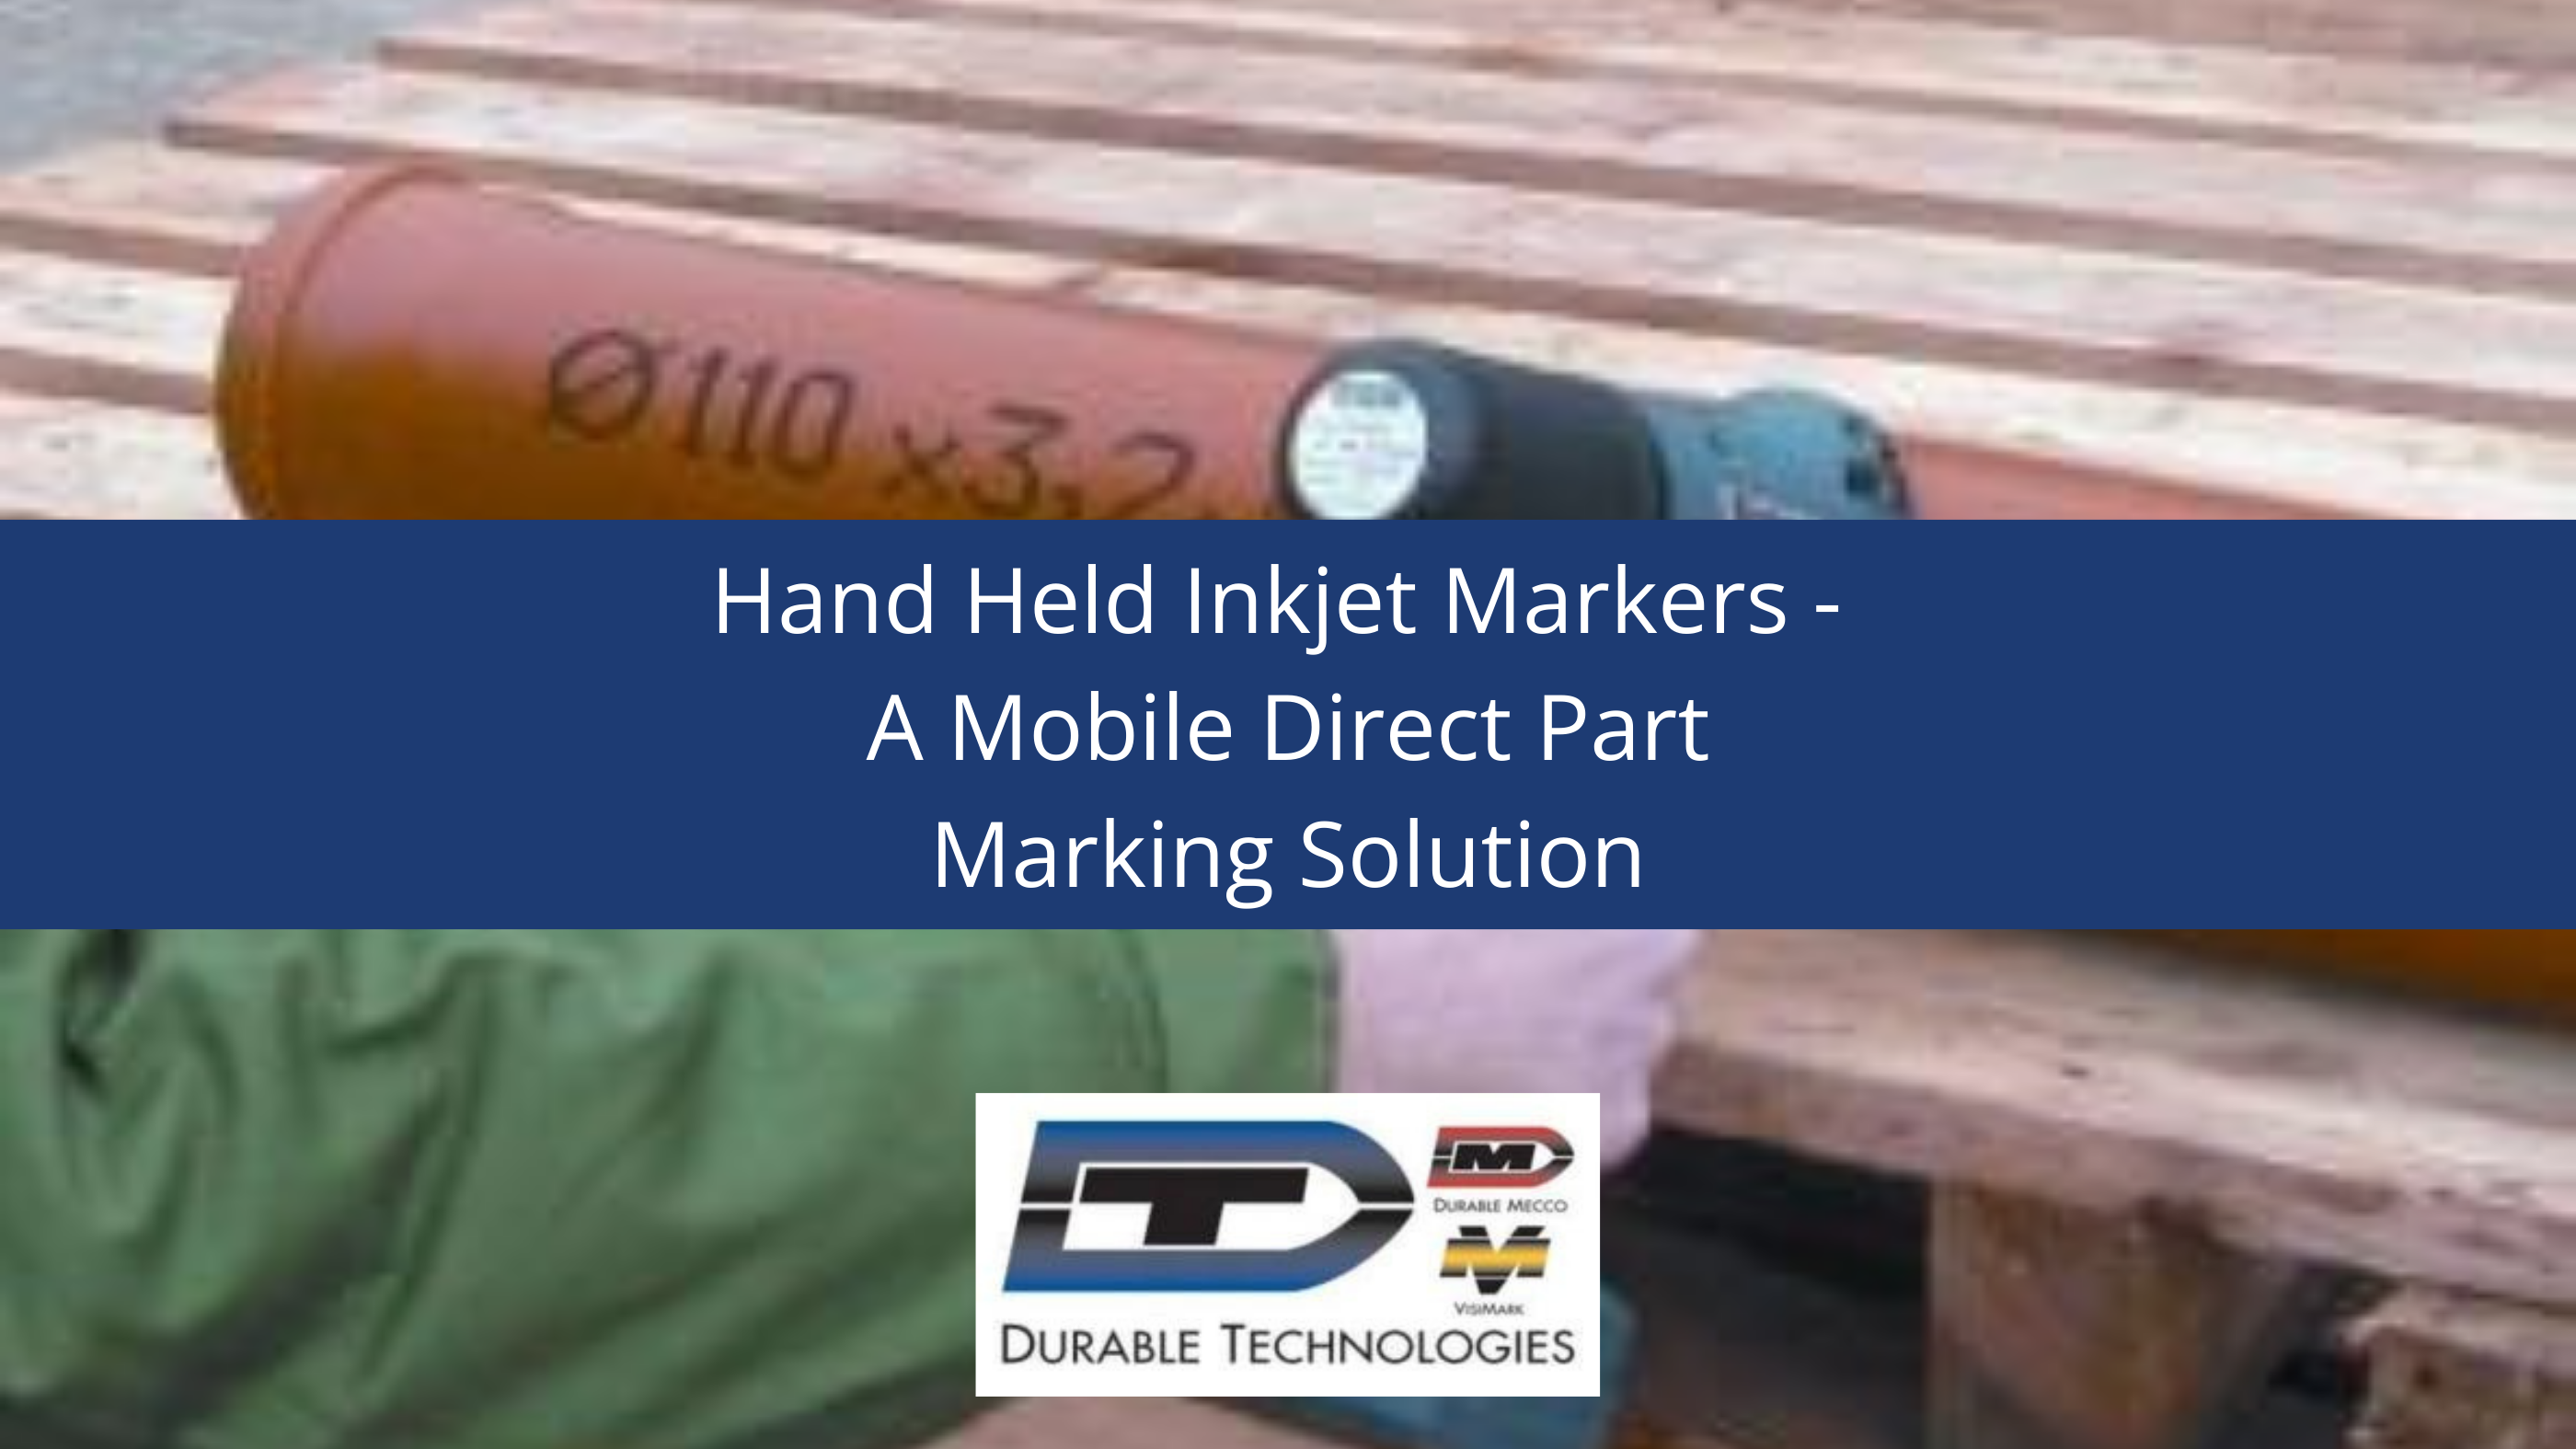 Hand Held Inkjet Markers - A Mobile Direct Part Marking Solution